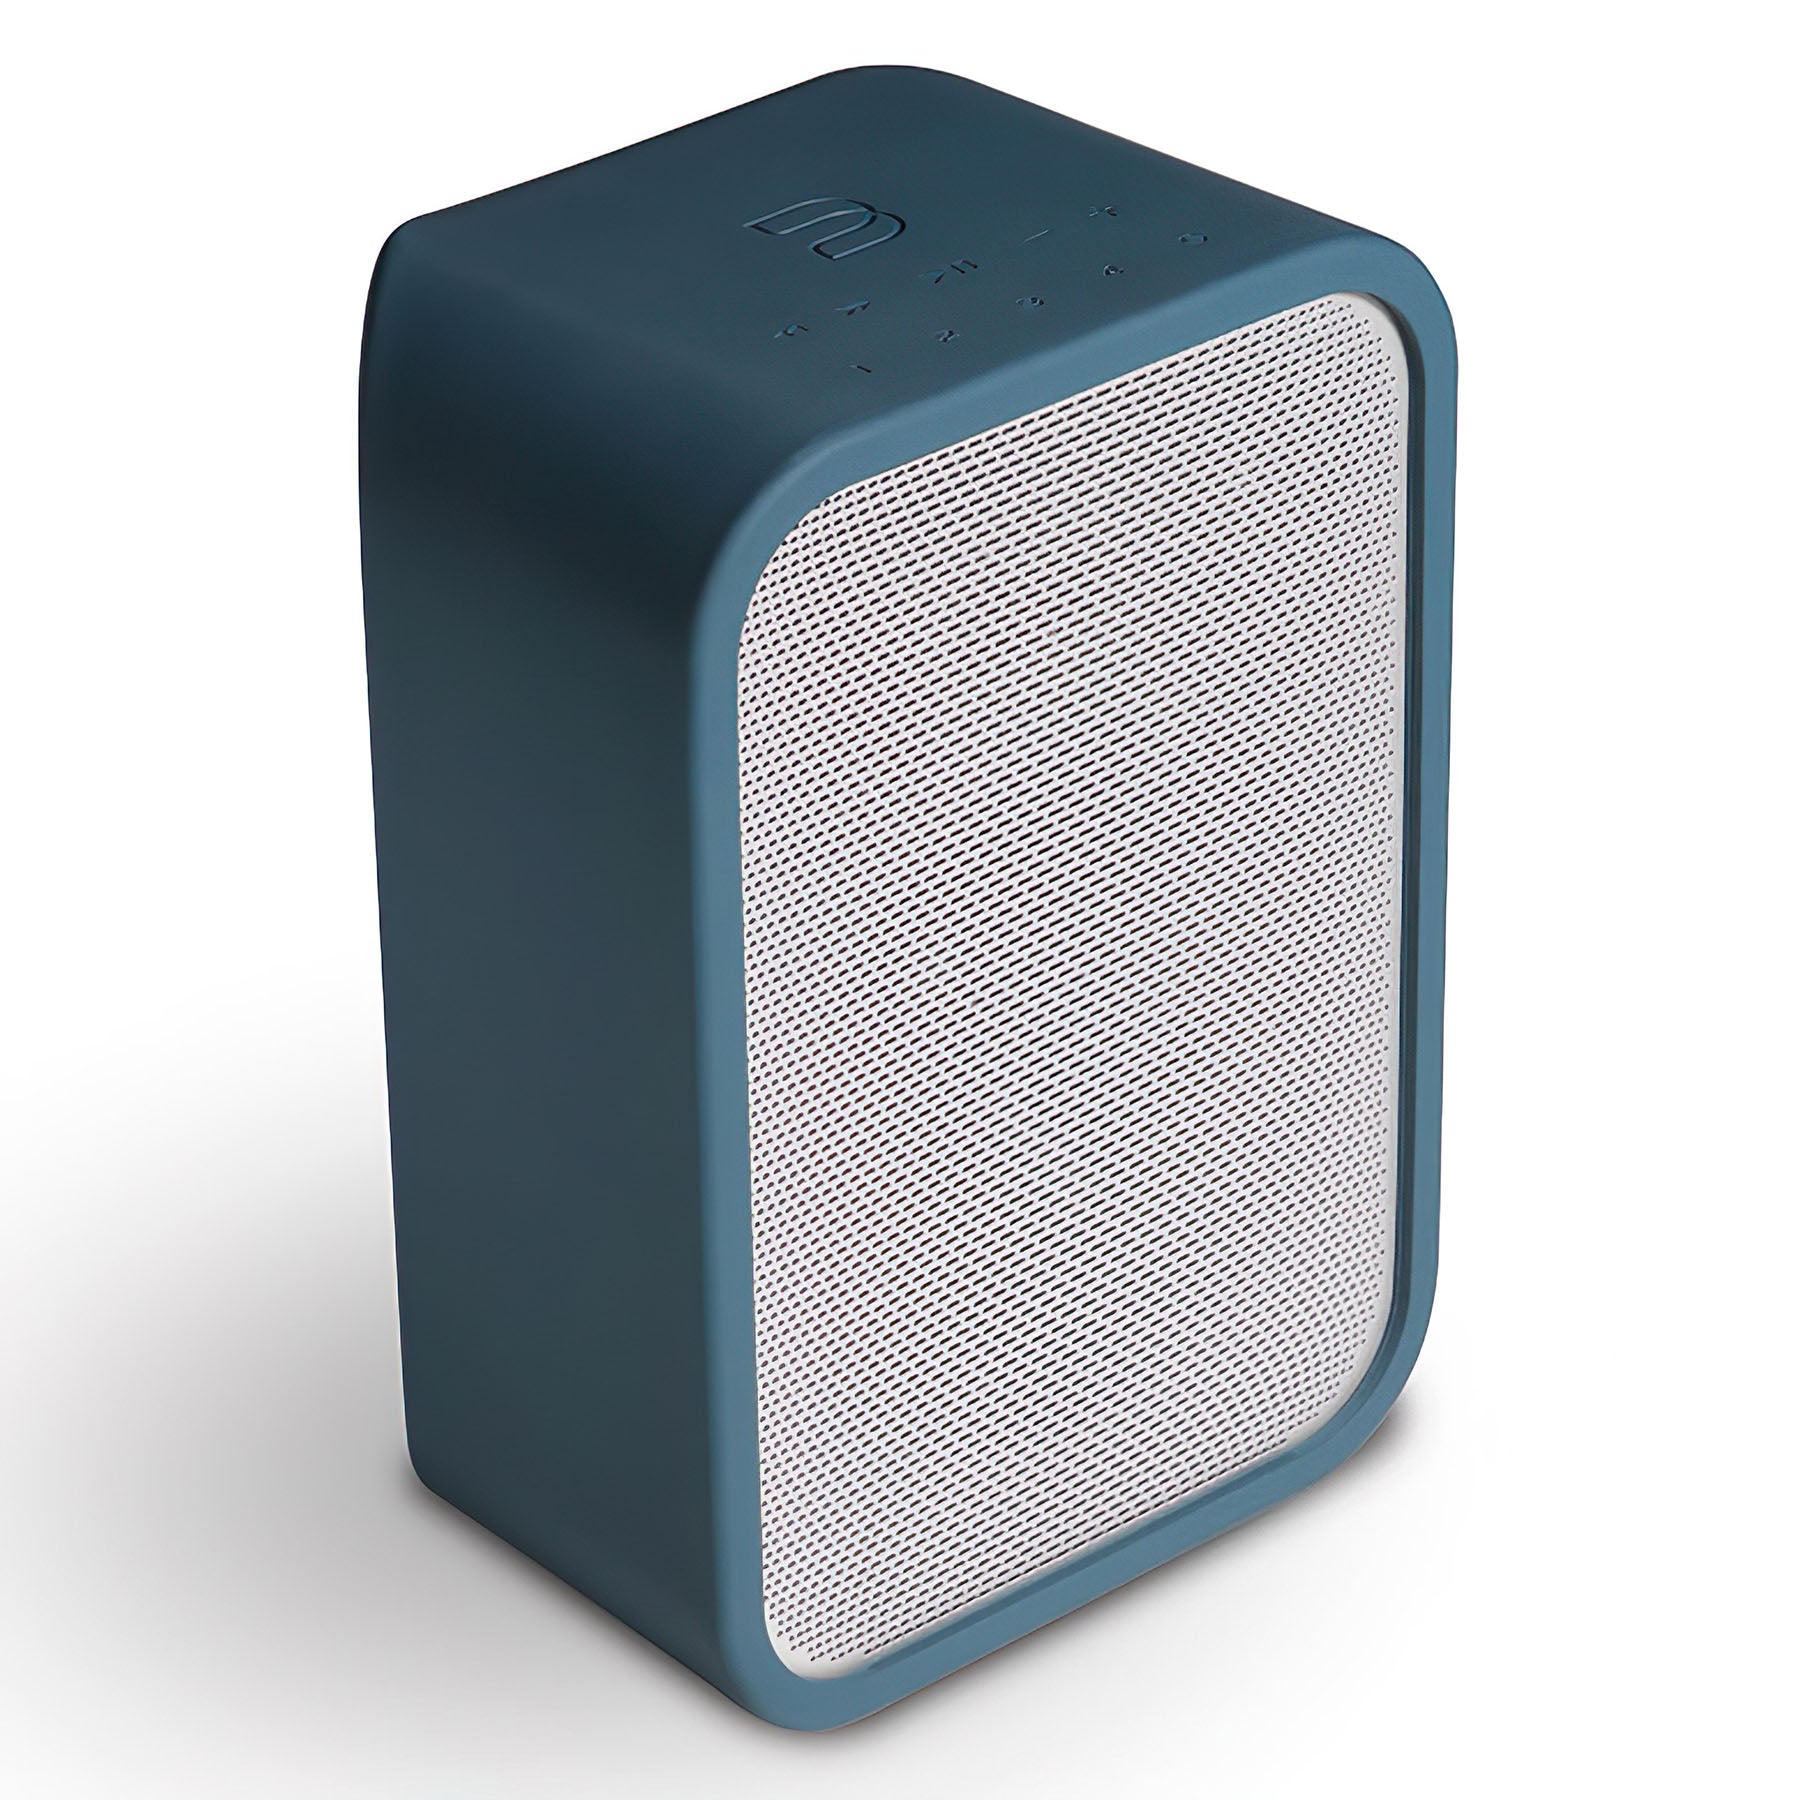 Bluesound PULSE FLEX Skin Complement your decor with a punch of color